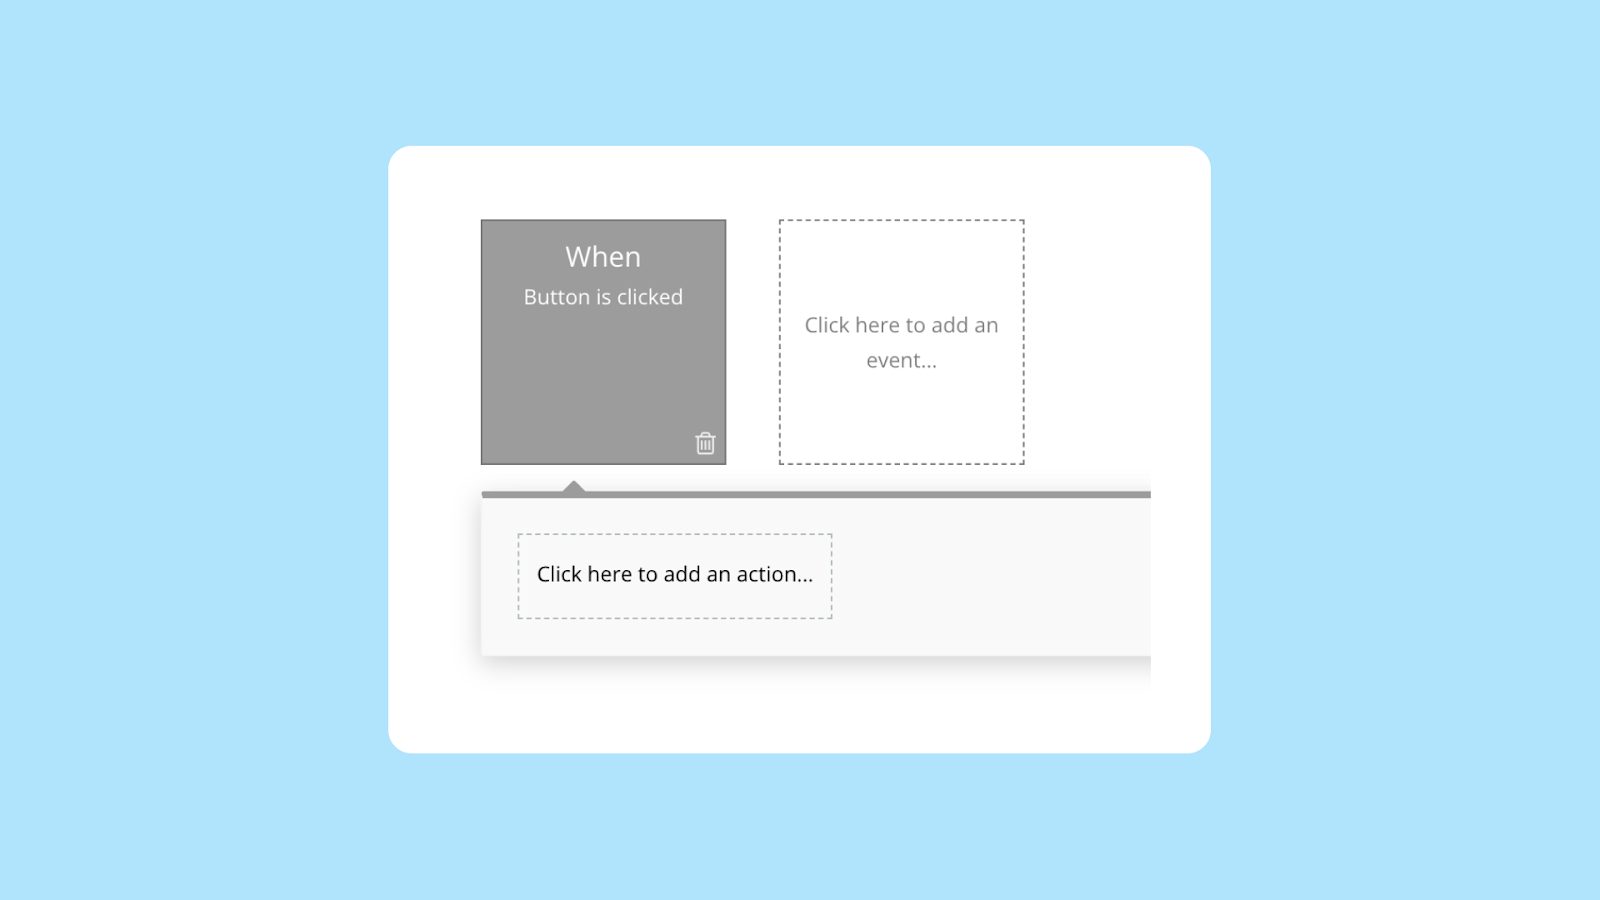 A screenshot of a new workflow for "When Button is clicked" being created.